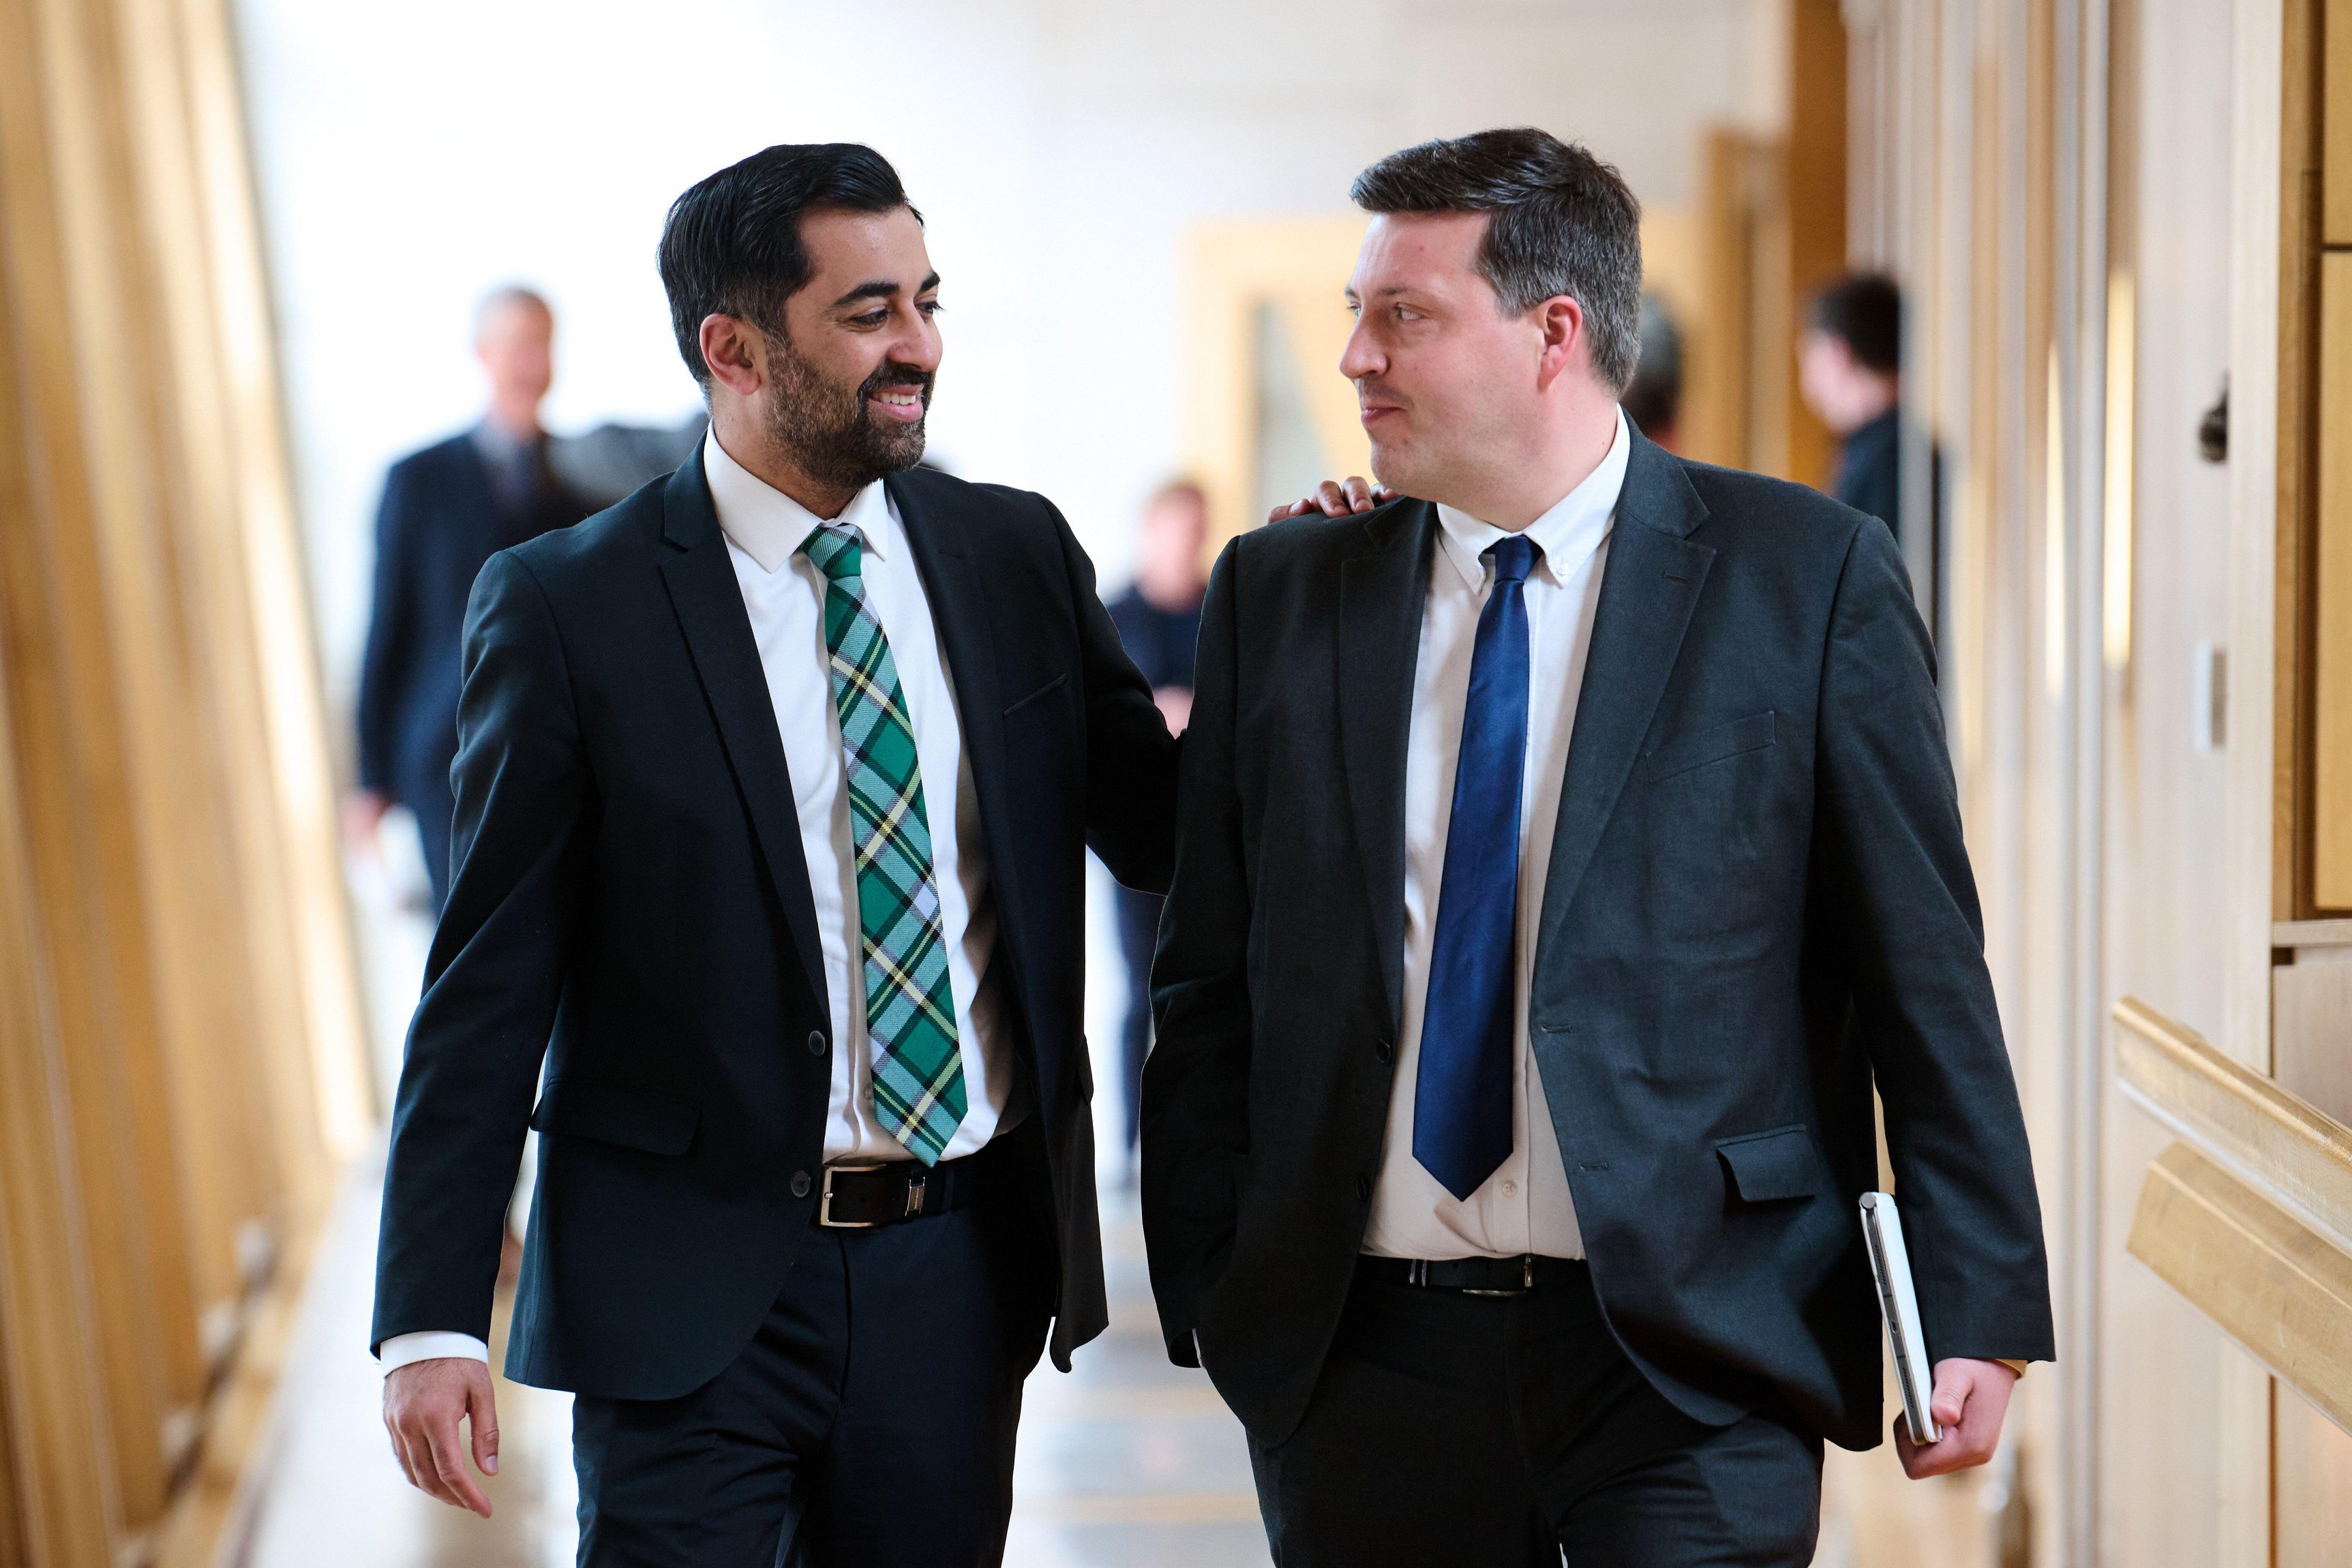 Humza Yousaf with Jamie Hepburn, the minister for independence, at Holyrood where he enjoyed a warm reception and a standing ovation